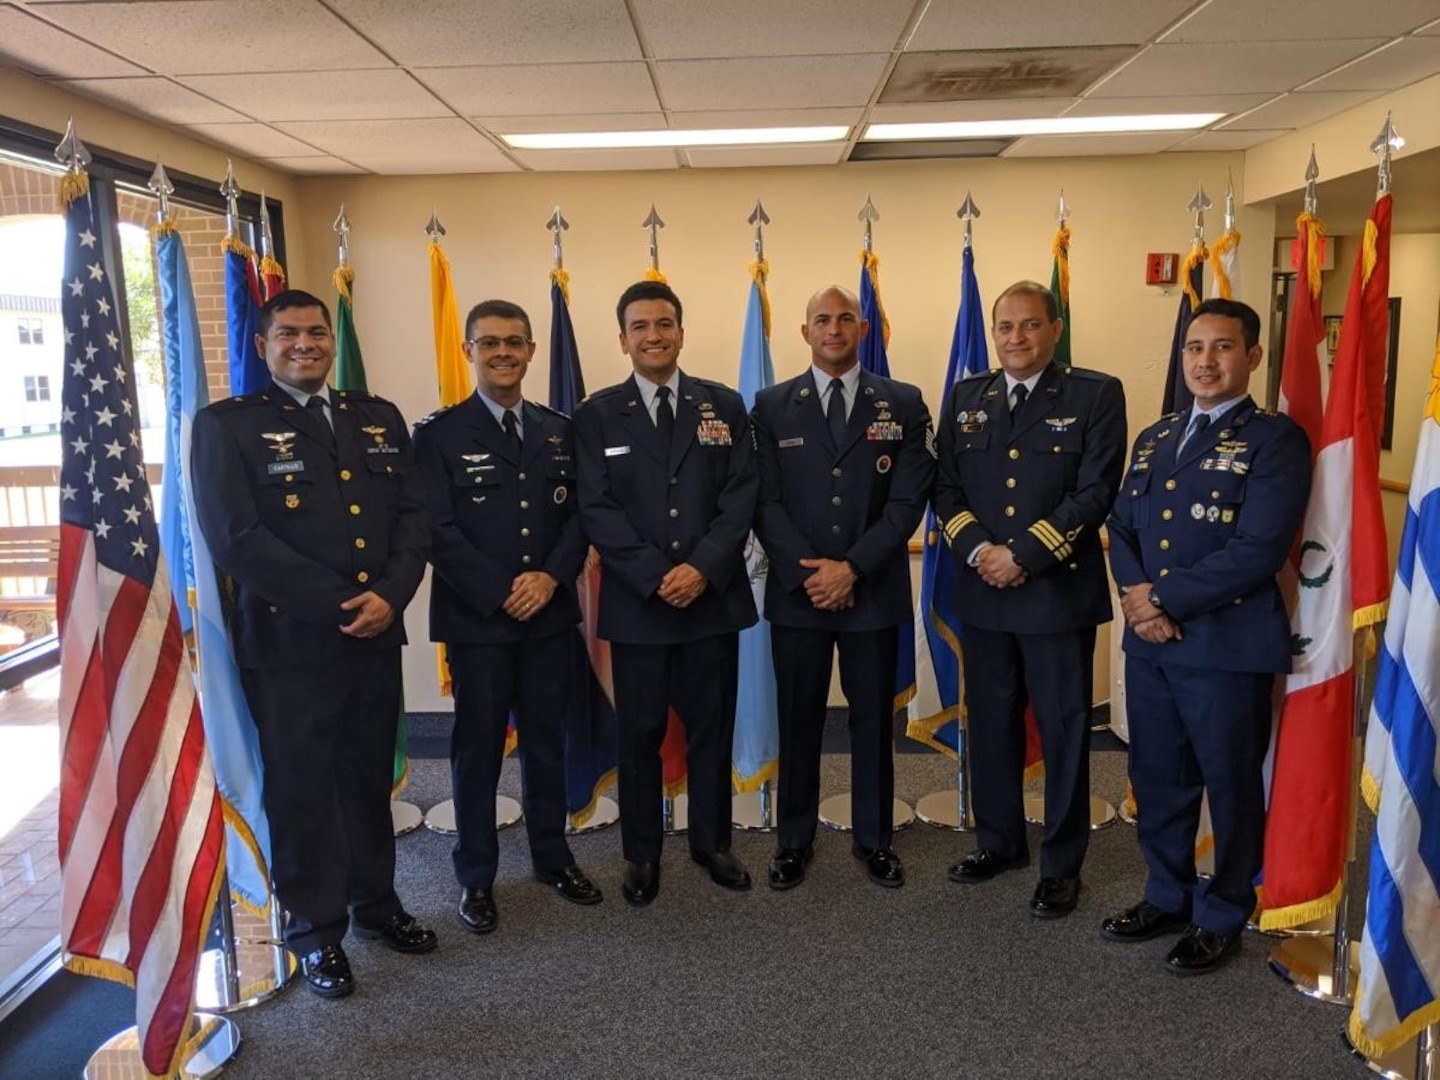 International and American service members, Professional Military Education instructors, pose for a photo at the IAAFA headquarters building. From left to right, Major Ronand Castillo from El Salvador, Major Marcio Teixeira from Brazil, Major Eduardo Barajas, a flight commander from the US Air Force, Master Sgt. Aguedo Mendez a flight chief from the US Air Force, Chief Master Sgt. Elvis Garcia from Peru, and Master Sgt. Edwin Lara from Honduras.